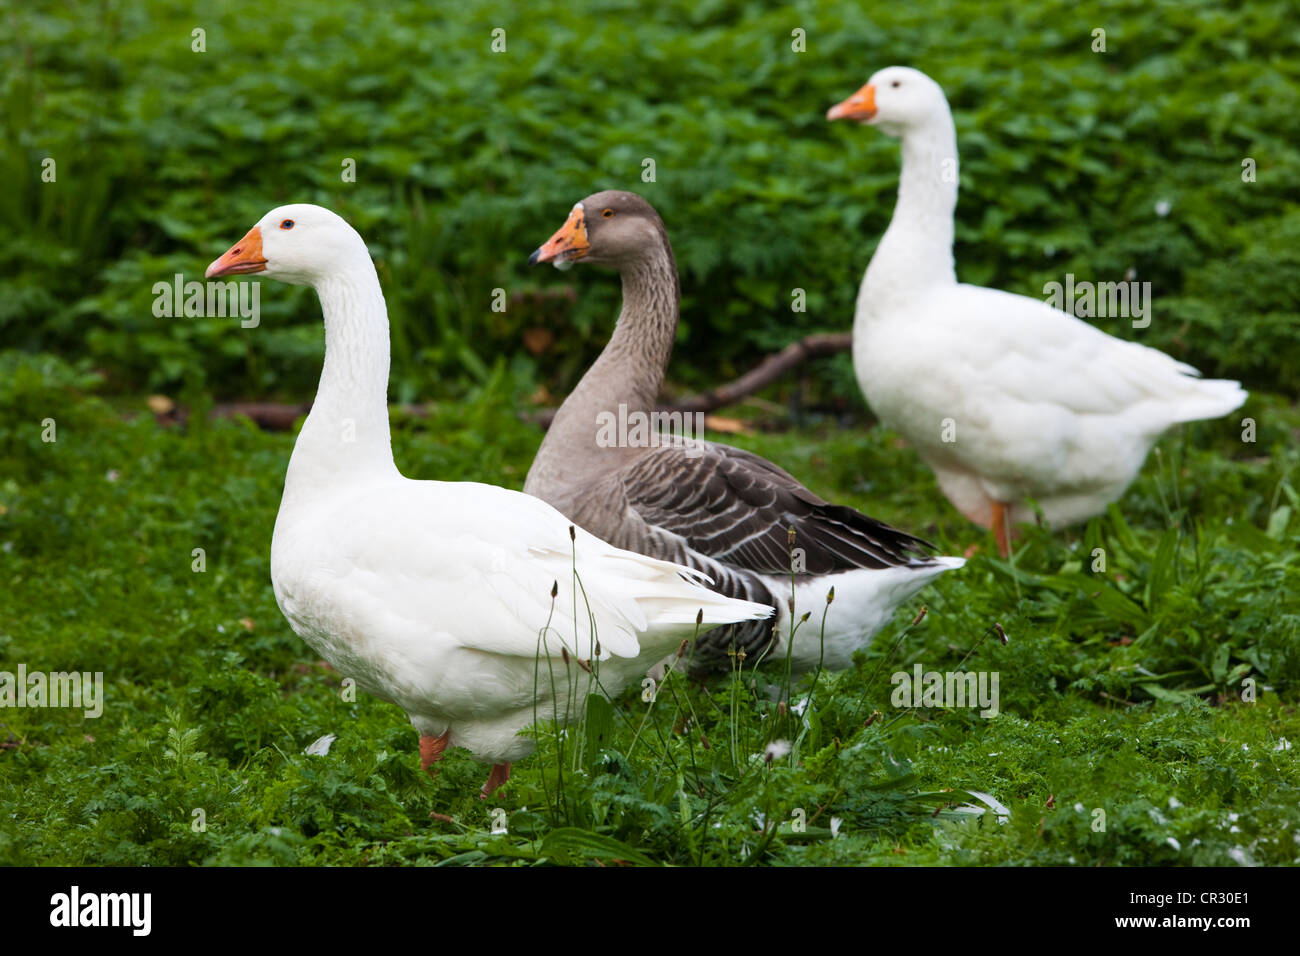 Domestic geese (Anser anser f. domestica) and a greylag goose (Anser anser), Czech Republic, Europe Stock Photo